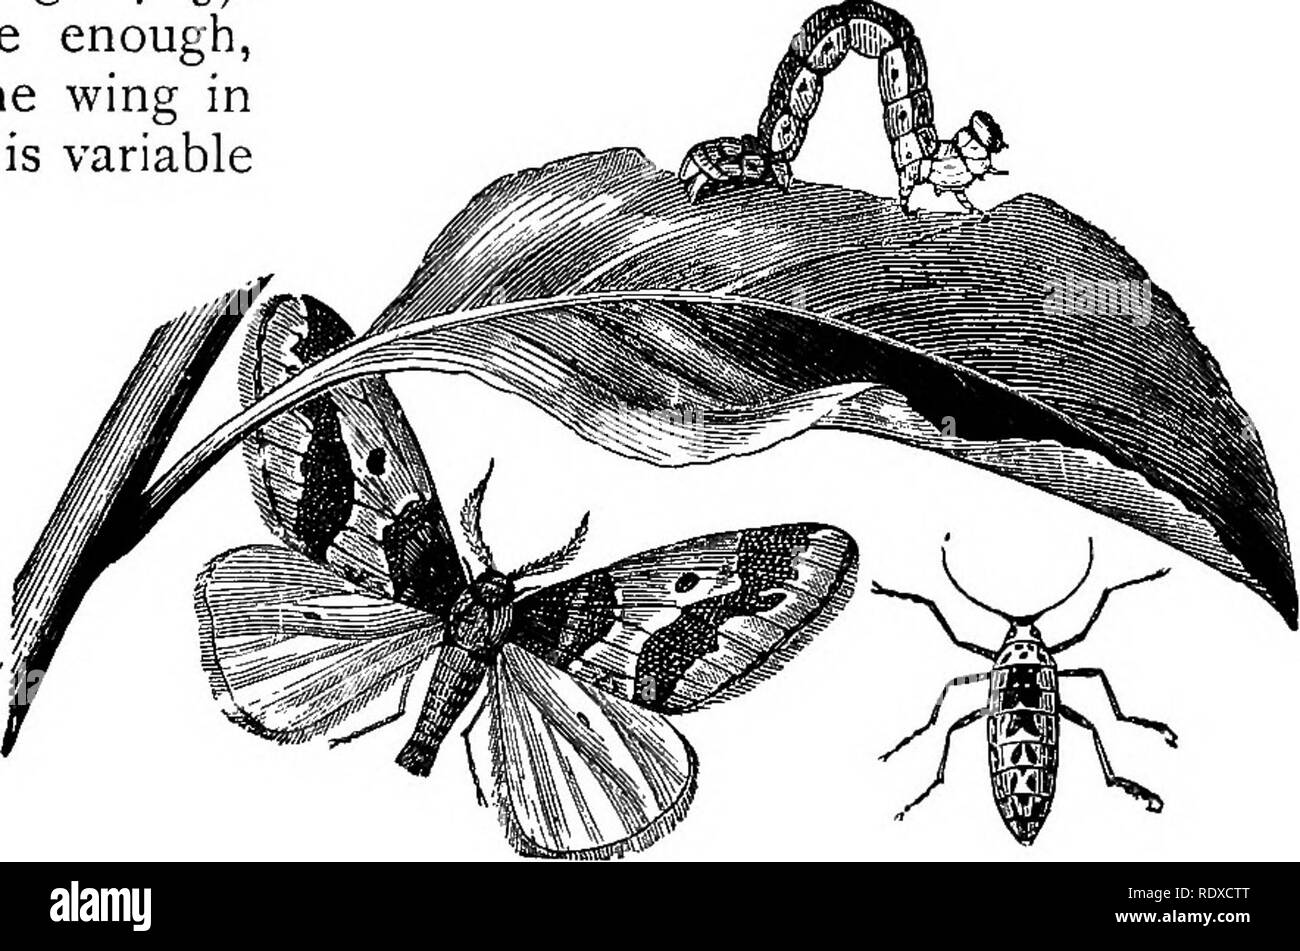 . The Book of gardening; a handbook of horticulture. Gardening; Horticulture. ON PESTS GENERALLY. IO93 Carrot, should be deposited on the earth and examined each morning. The remedies suggested under &quot;Wireworms&quot; should also be of service. Millipedes should not be confused with Centipedes, which are flatter, slenderer, and more active animals, with fewer legs. The latter are carnivorous, and of the greatest service to the gardener. They are found under garden rubbish, pots, &amp;c. More than one species of Centipede is luminous, and on that account are confused with Glow-Worms. Mottle Stock Photo